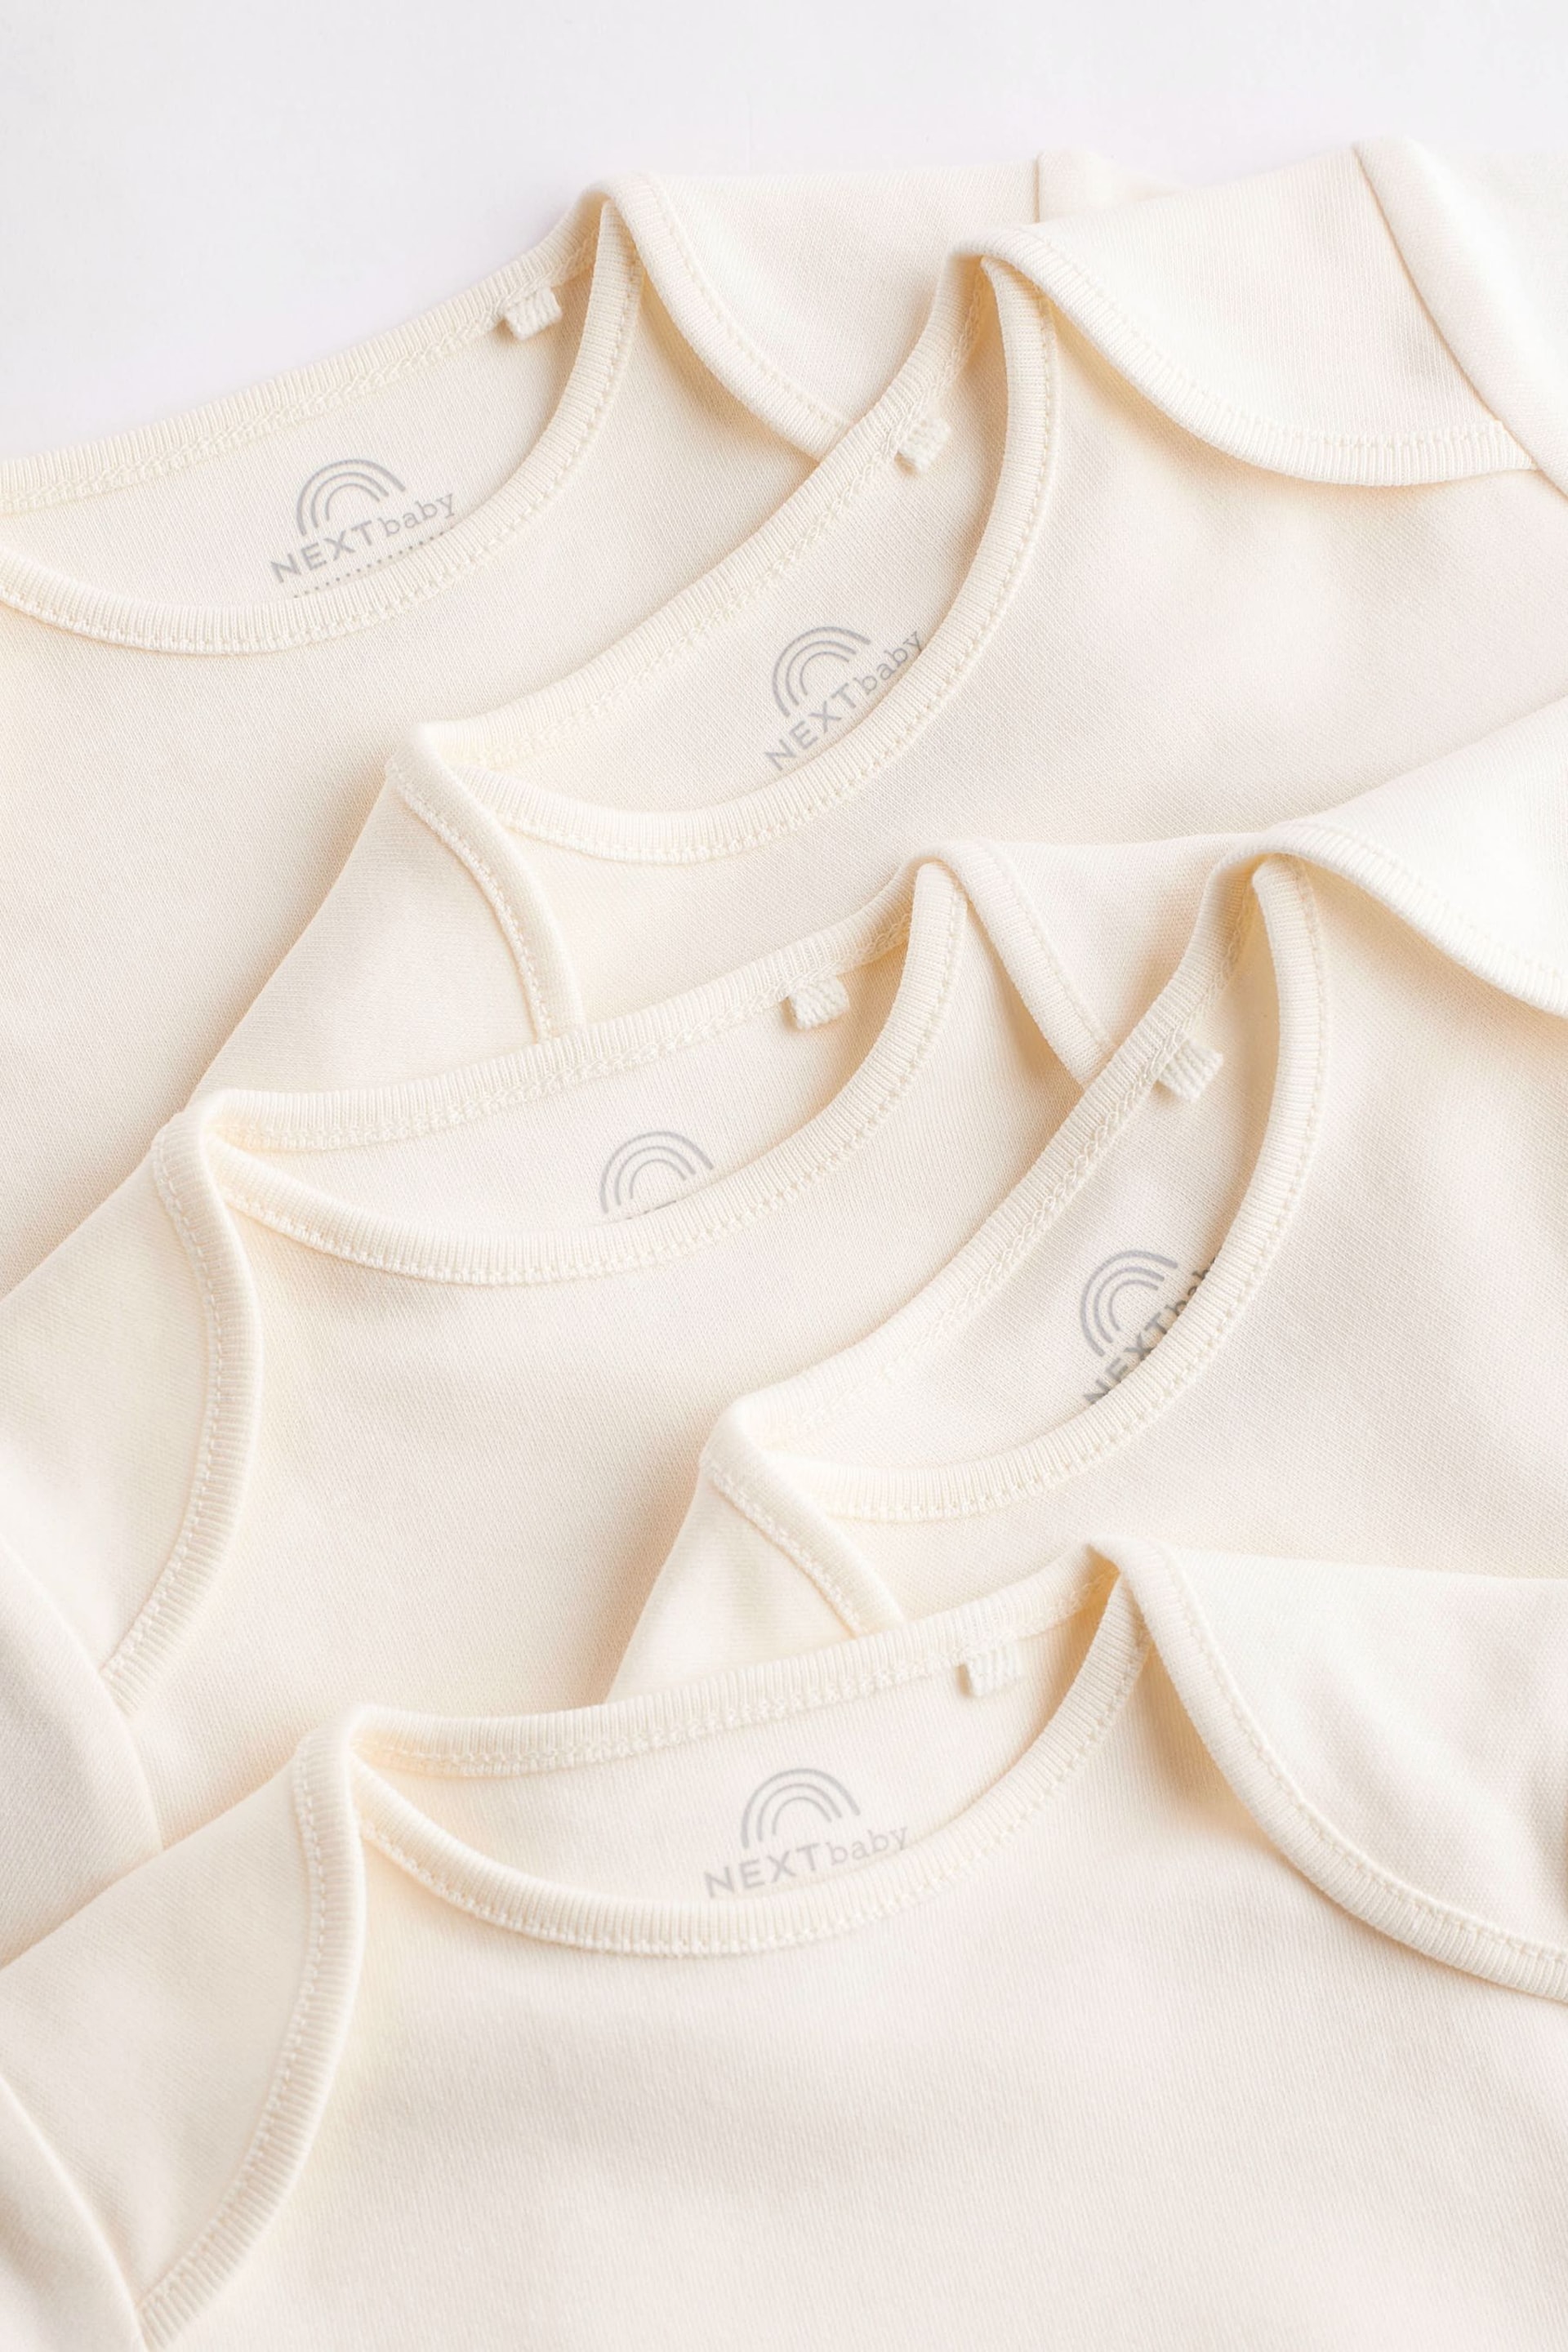 Cream Essential Baby Long Sleeve Bodysuits 5 Pack - Image 4 of 7